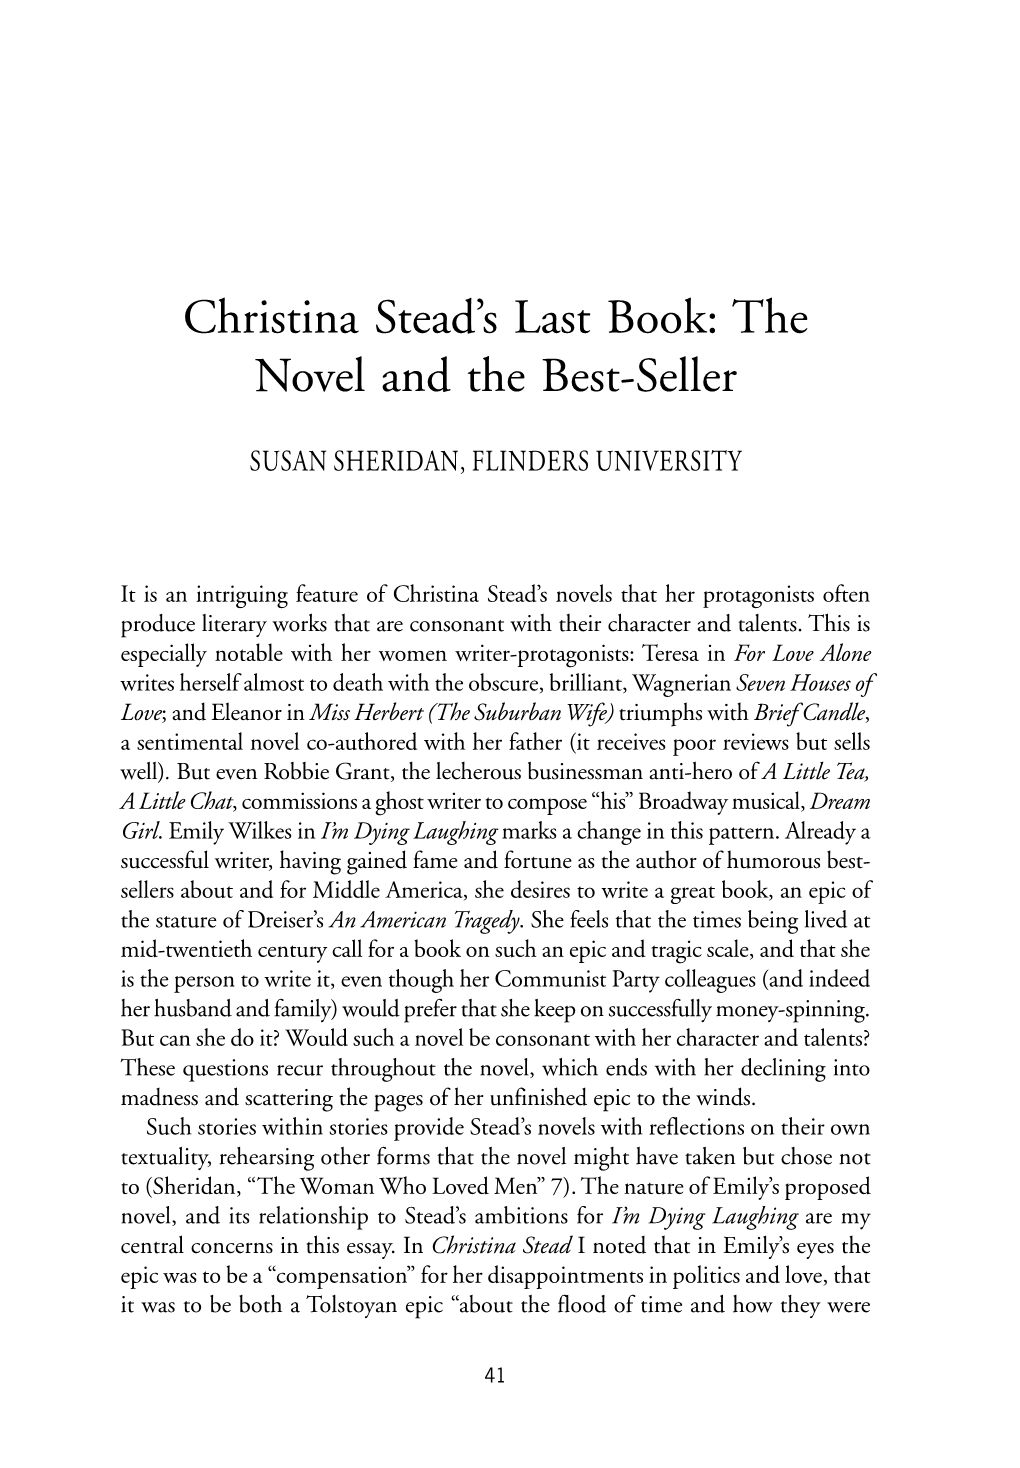 Christina Stead's Last Book: the Novel and the Best-Seller